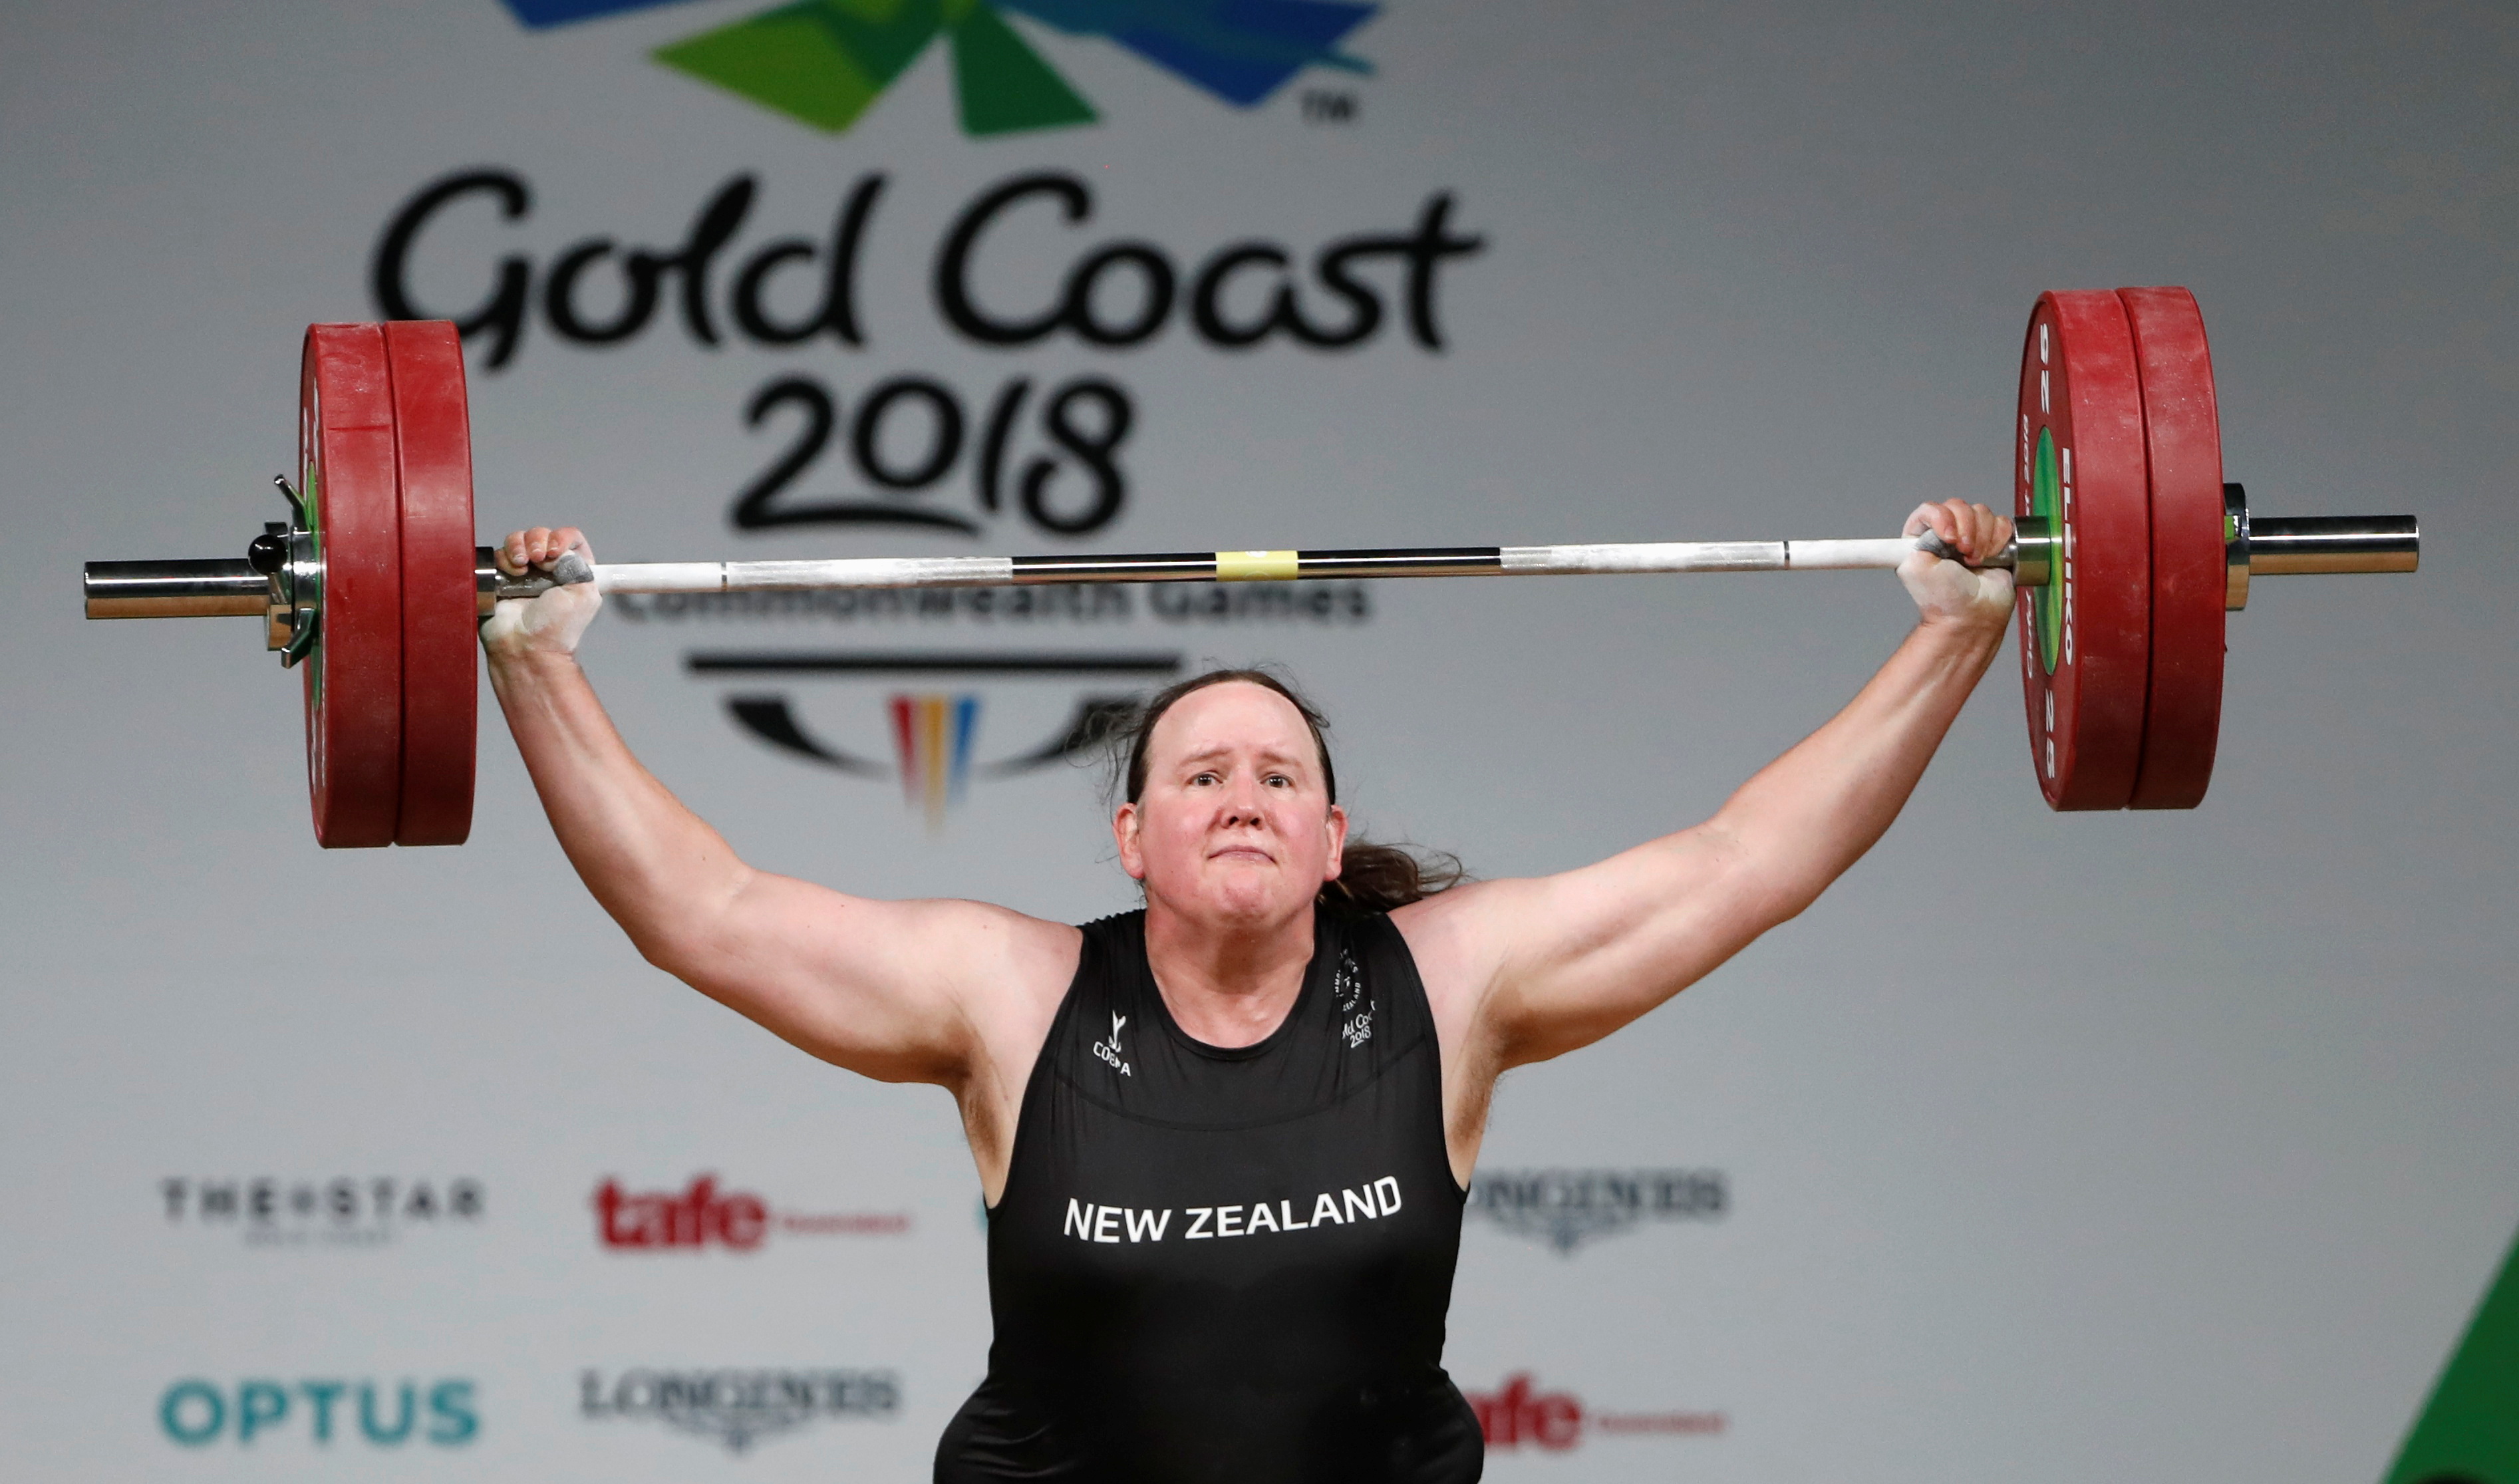 Weightlifting - Gold Coast 2018 Commonwealth Games - Women's +90kg - Final - Carrara Sports Arena 1 - Gold Coast, Australia - April 9, 2018. Laurel Hubbard of New Zealand competes. REUTERS/Paul Childs 